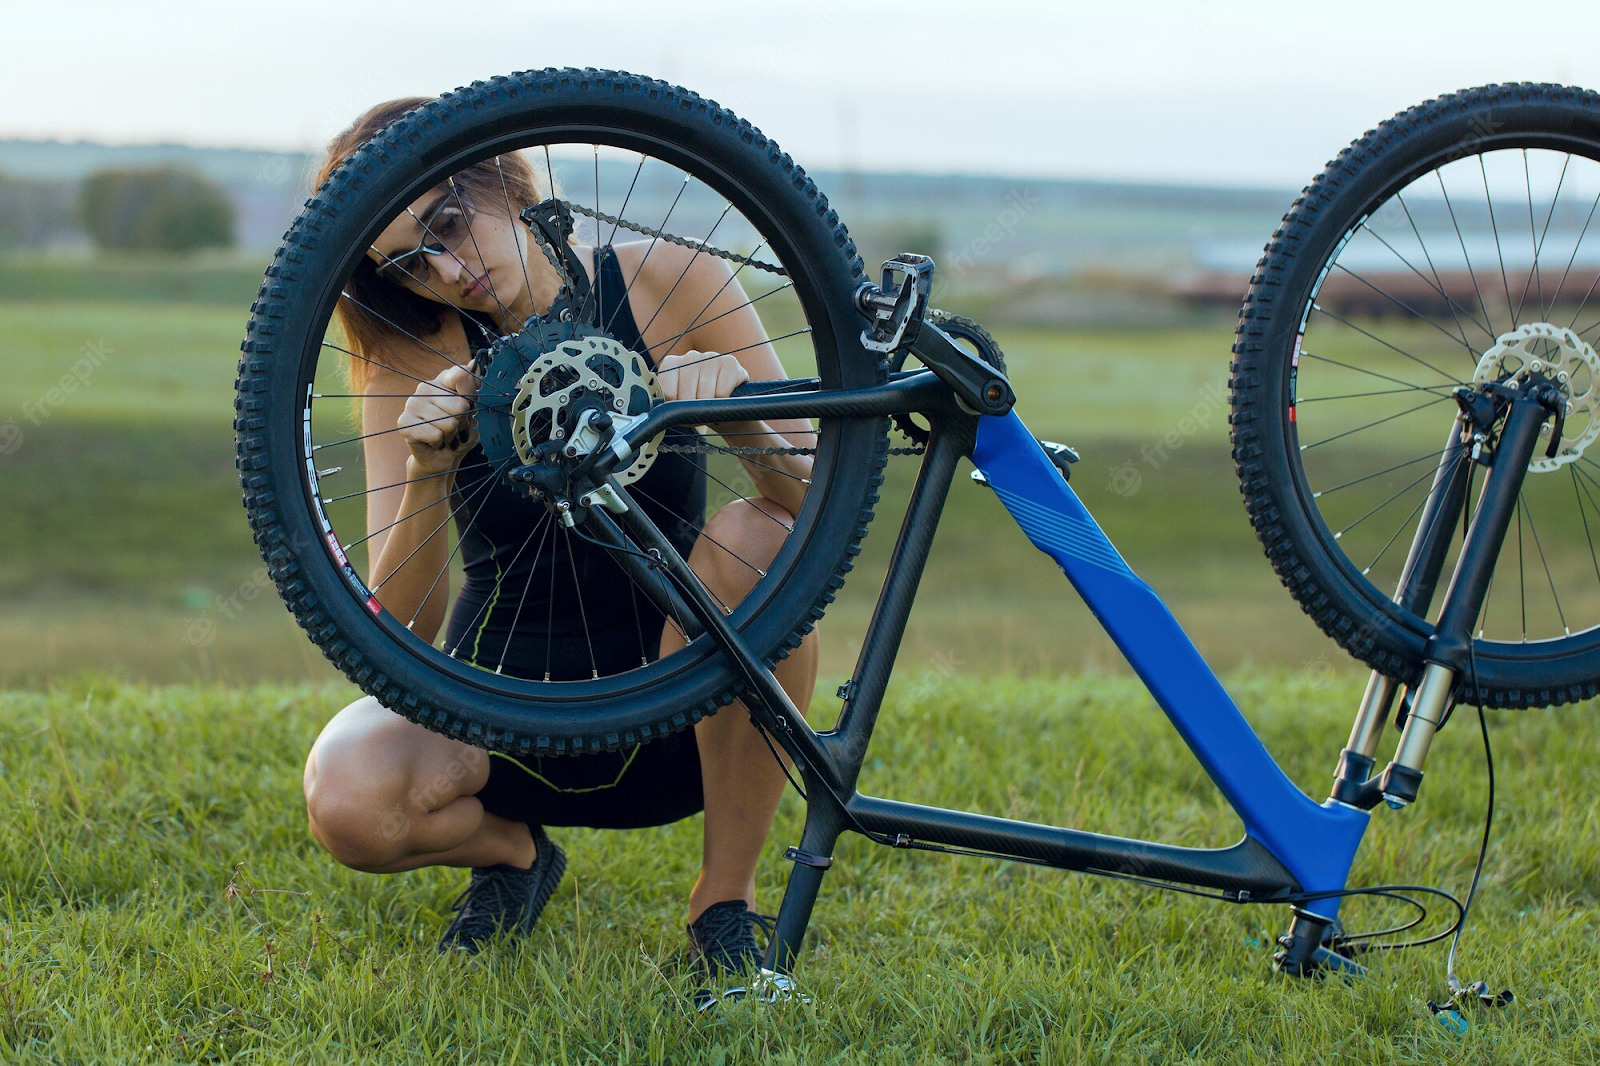 Your mountain bike tool kit essentials will include smaller tools that you need to make small repairs while you are out riding.